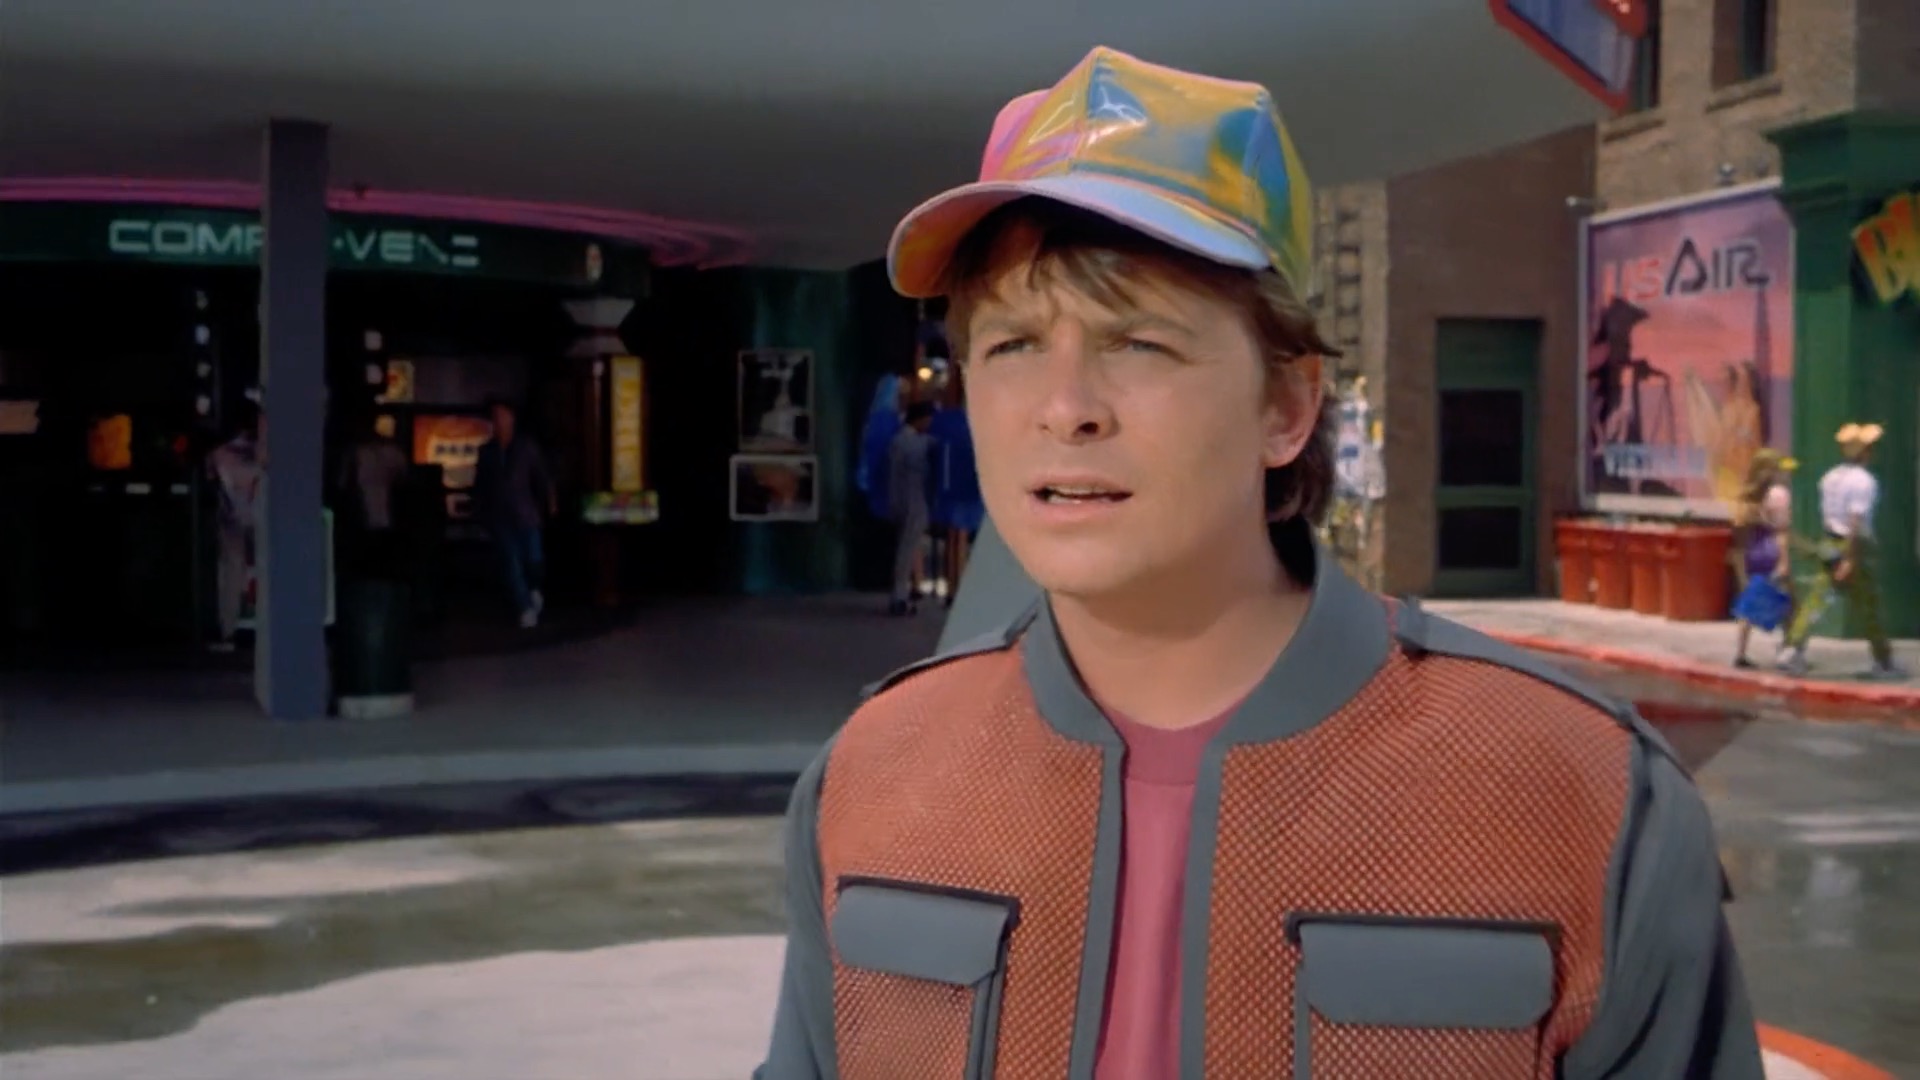 Michael J. Fox creates 'Back To The Future' goalie mask with